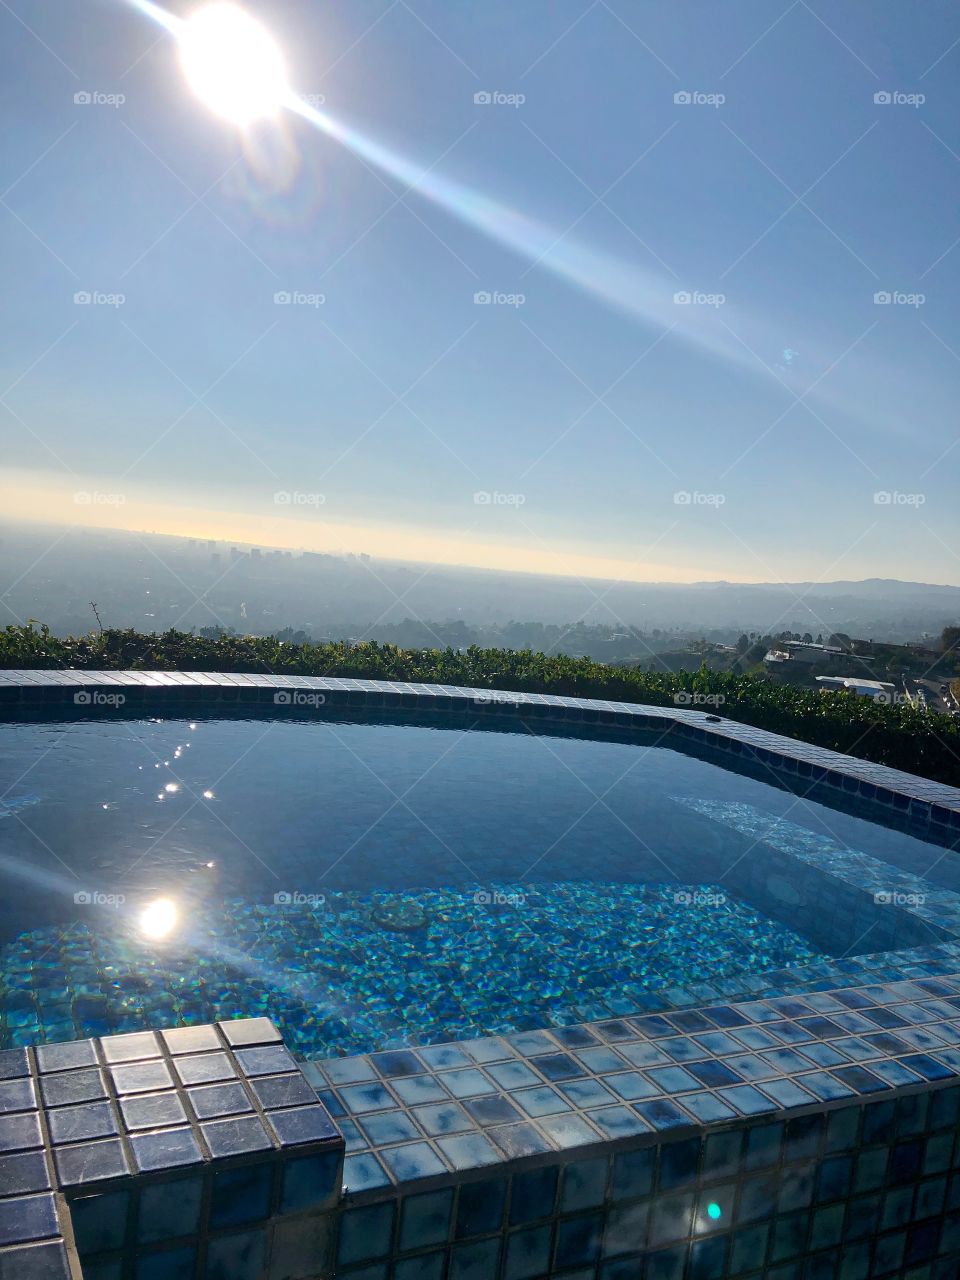 Beautiful sunny day with a stunning view of Hollywood Hills and Los Angeles. Top deck luxury pool to enjoy the mountain and city views. 